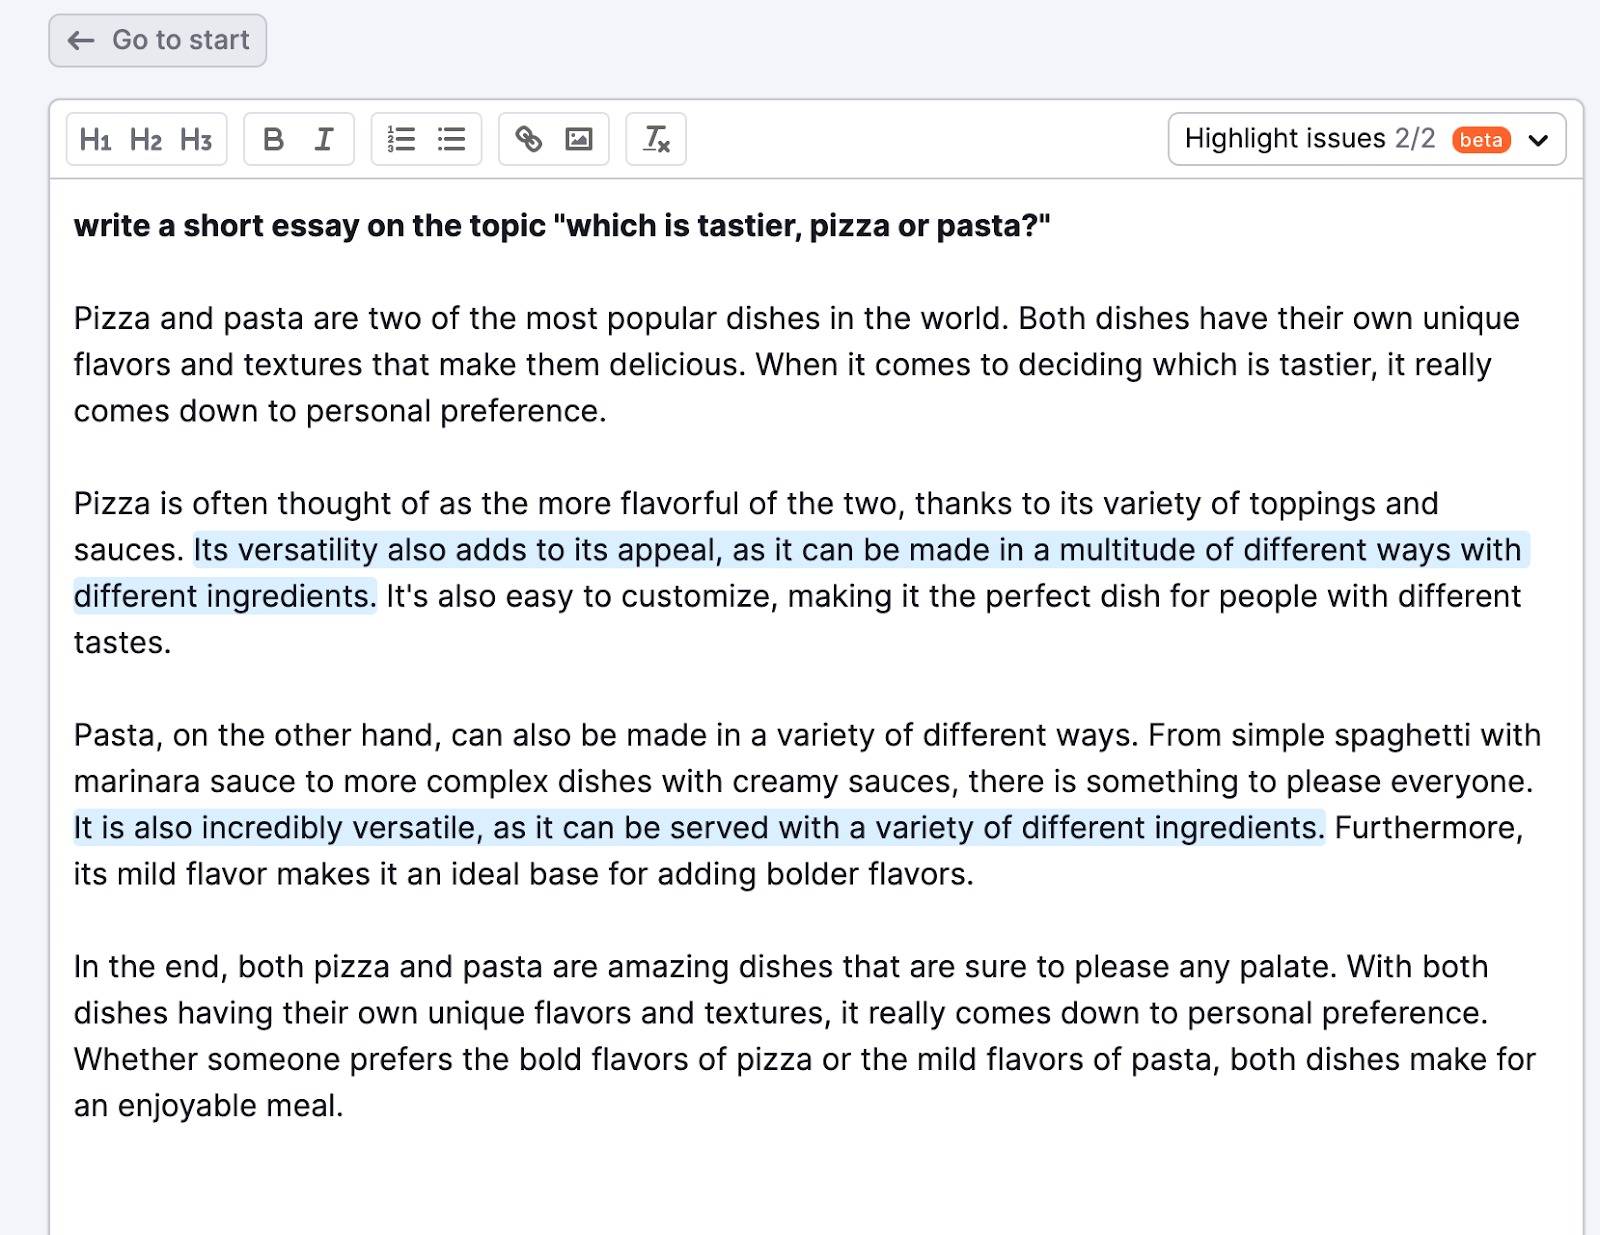 Example of the Compose with AI feature. In this example, the user asks the tool to write a short essay on the topic 'which is tastier, pizza or pasta?'. The tool then replies with four paragraphs on the topic. 